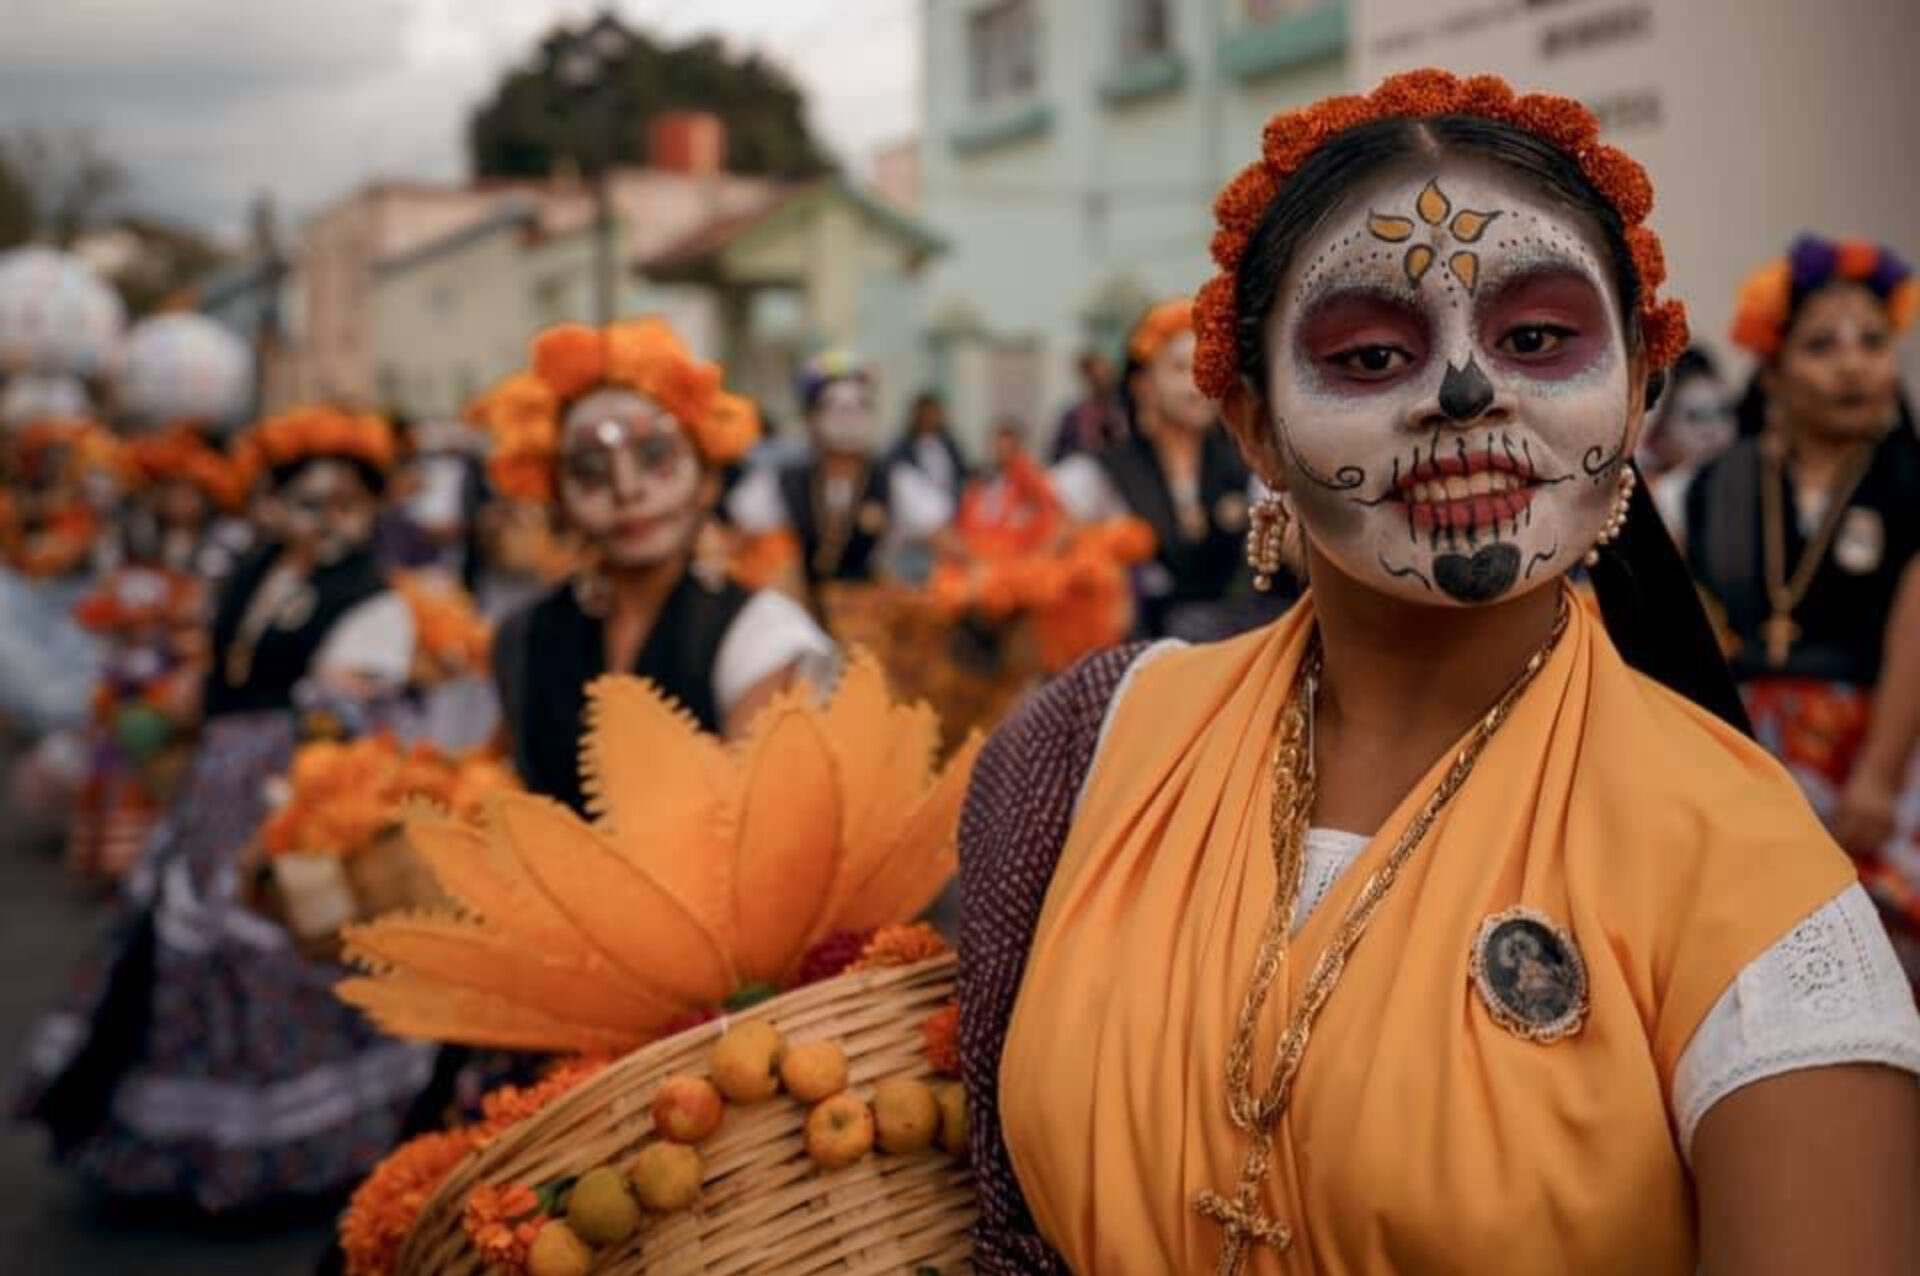 Local women at the Parade during the Day of the Dead Celebrations at Oaxaca